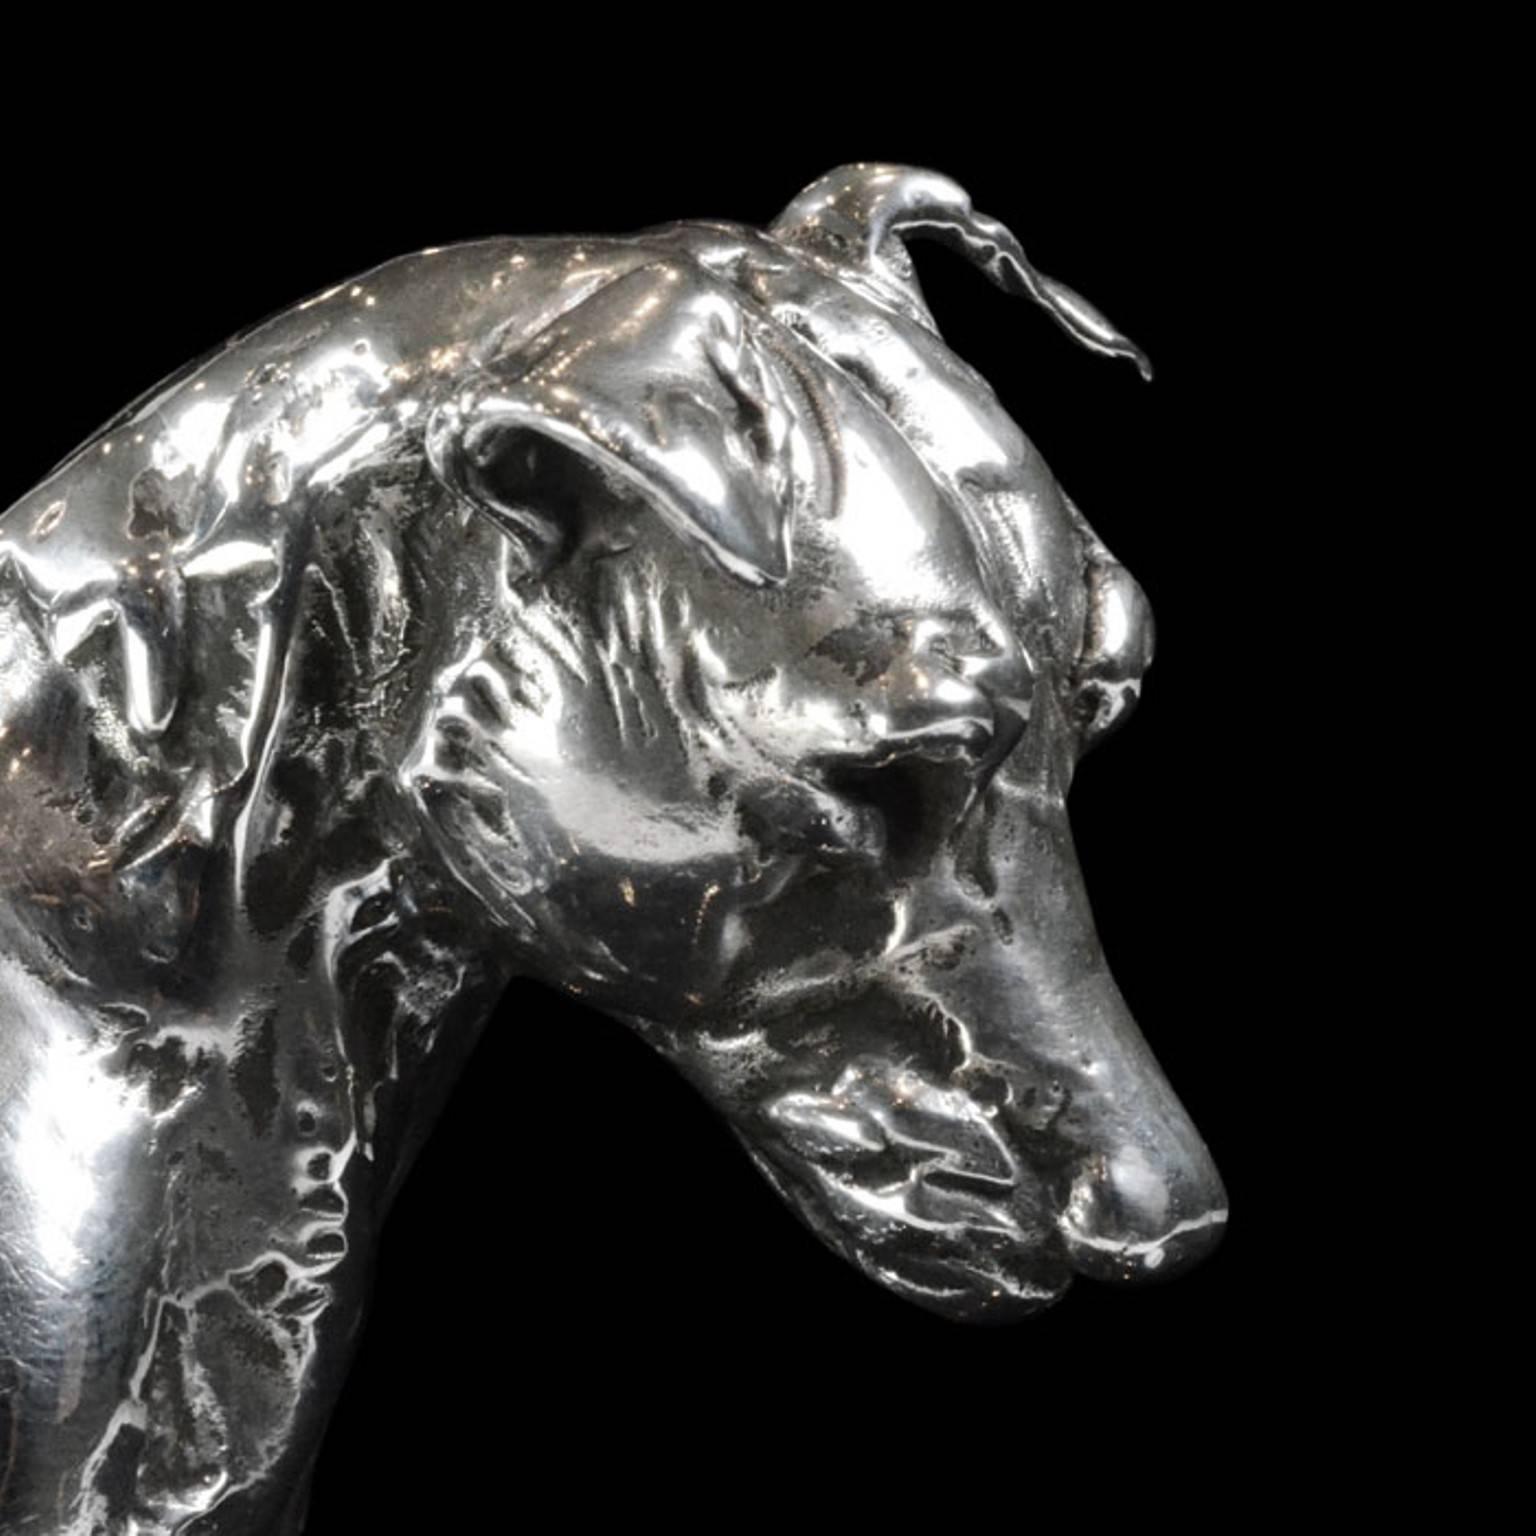 'Patterdale Terrier' in Sterling silver, Silver sculpture by Lucy Kinsella
The limited edition finely modelled terrier stands squarely with his head cocked to one side, ears pricked and short tail pointing straight upwards. He stares intently at the